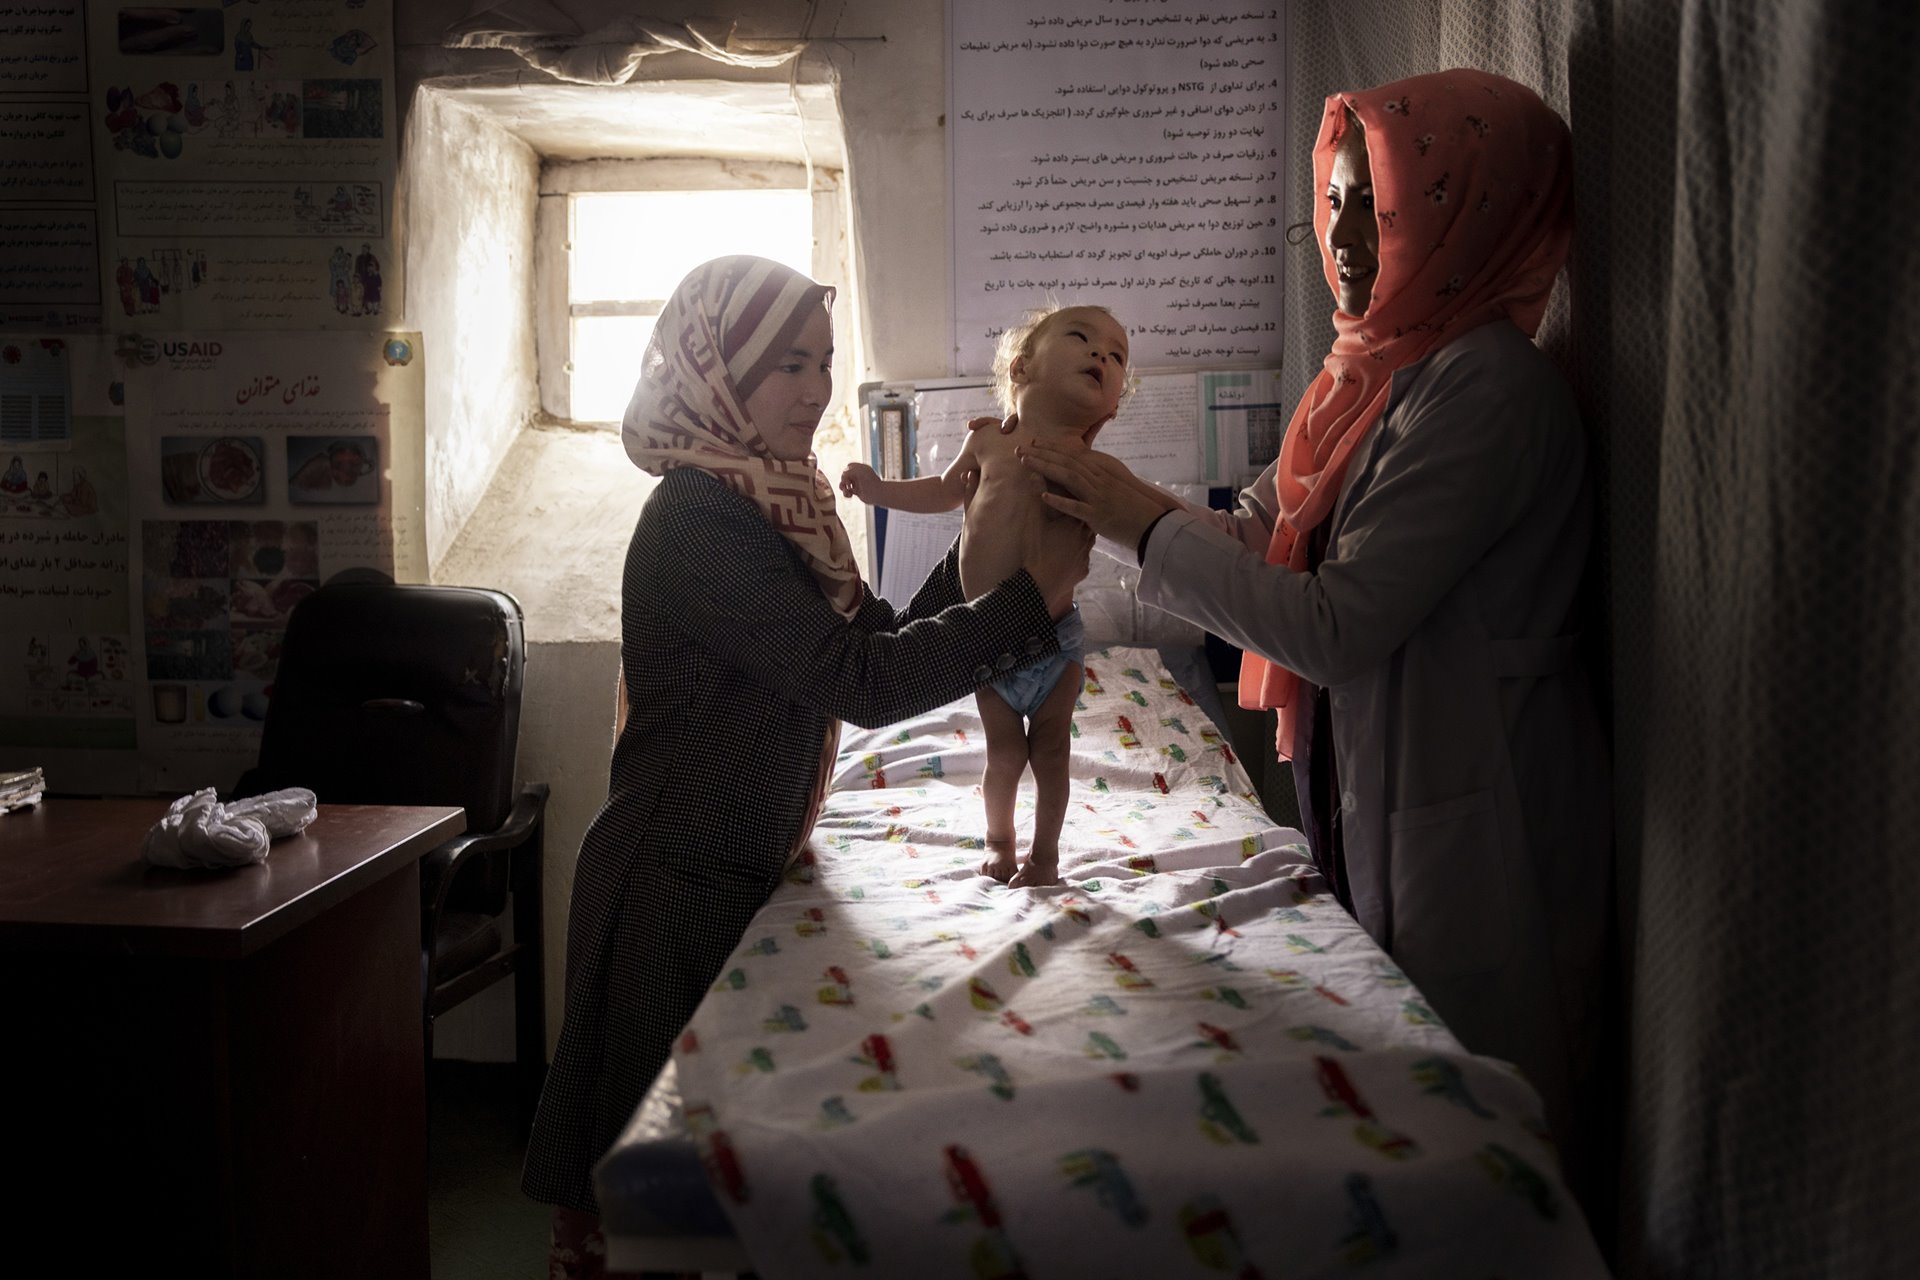 <p>Hojatullah (11 months old) is examined at a small clinic in Alibeg, near Bamiyan, Afghanistan. Although very young, he is already suffering from severe malnutrition, a common problem in this village where most survive on a daily diet of white bread and tea.&nbsp;</p>
